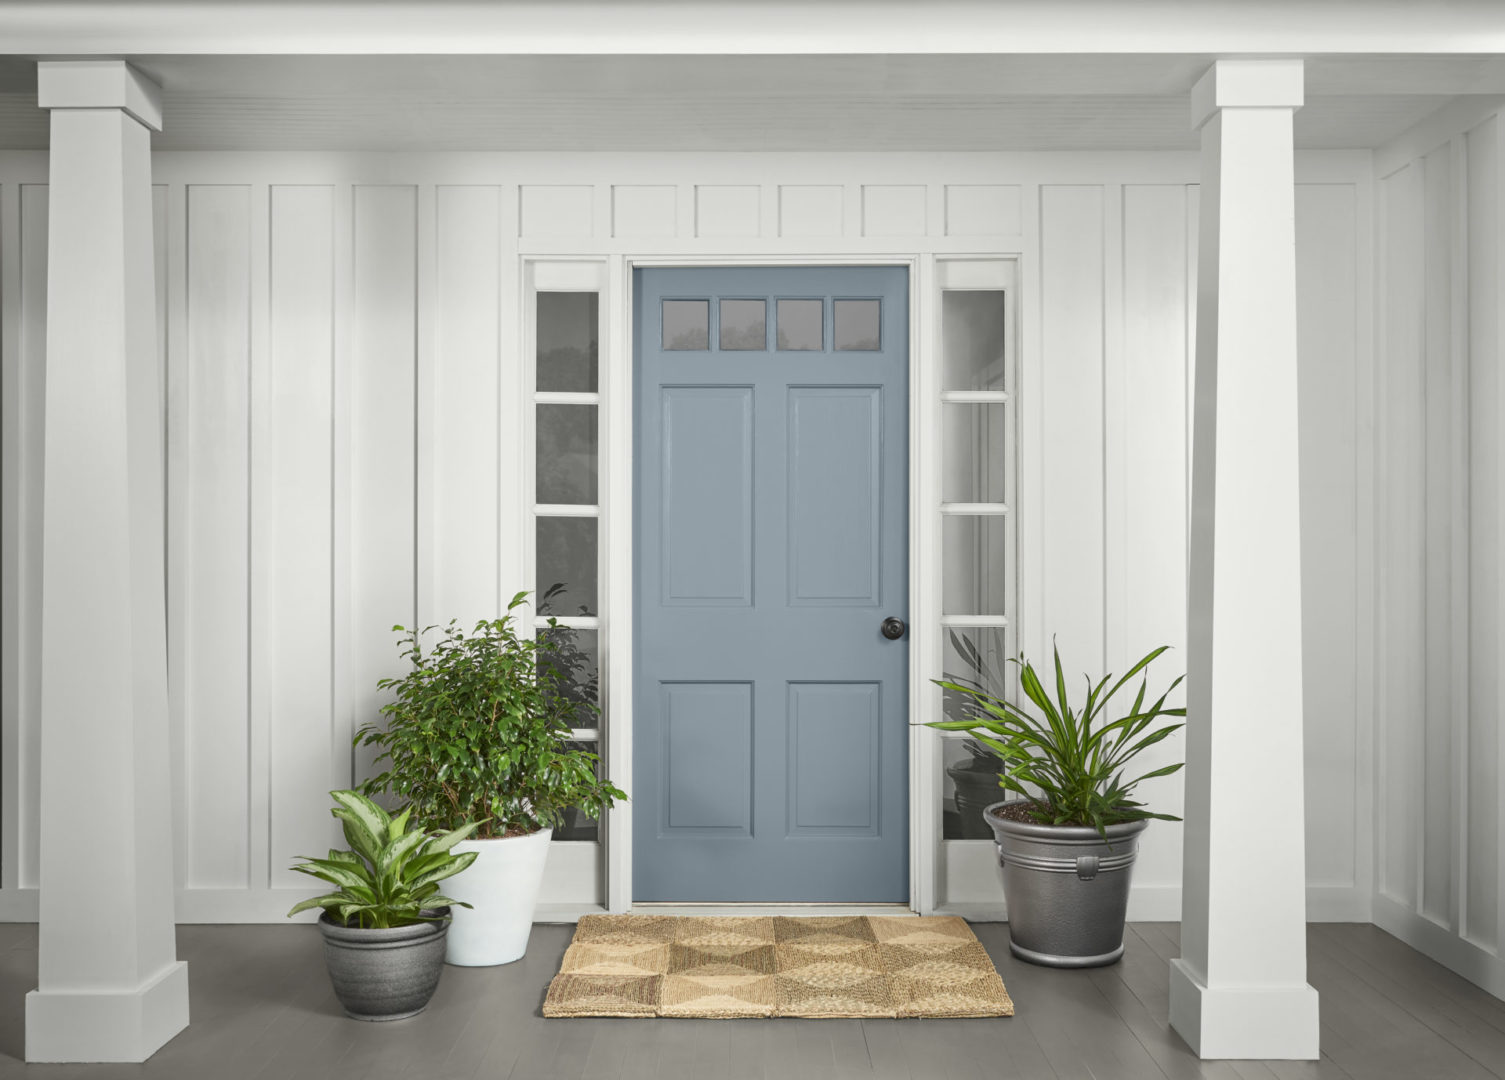 How To Paint a Front Door - Colorfully BEHR